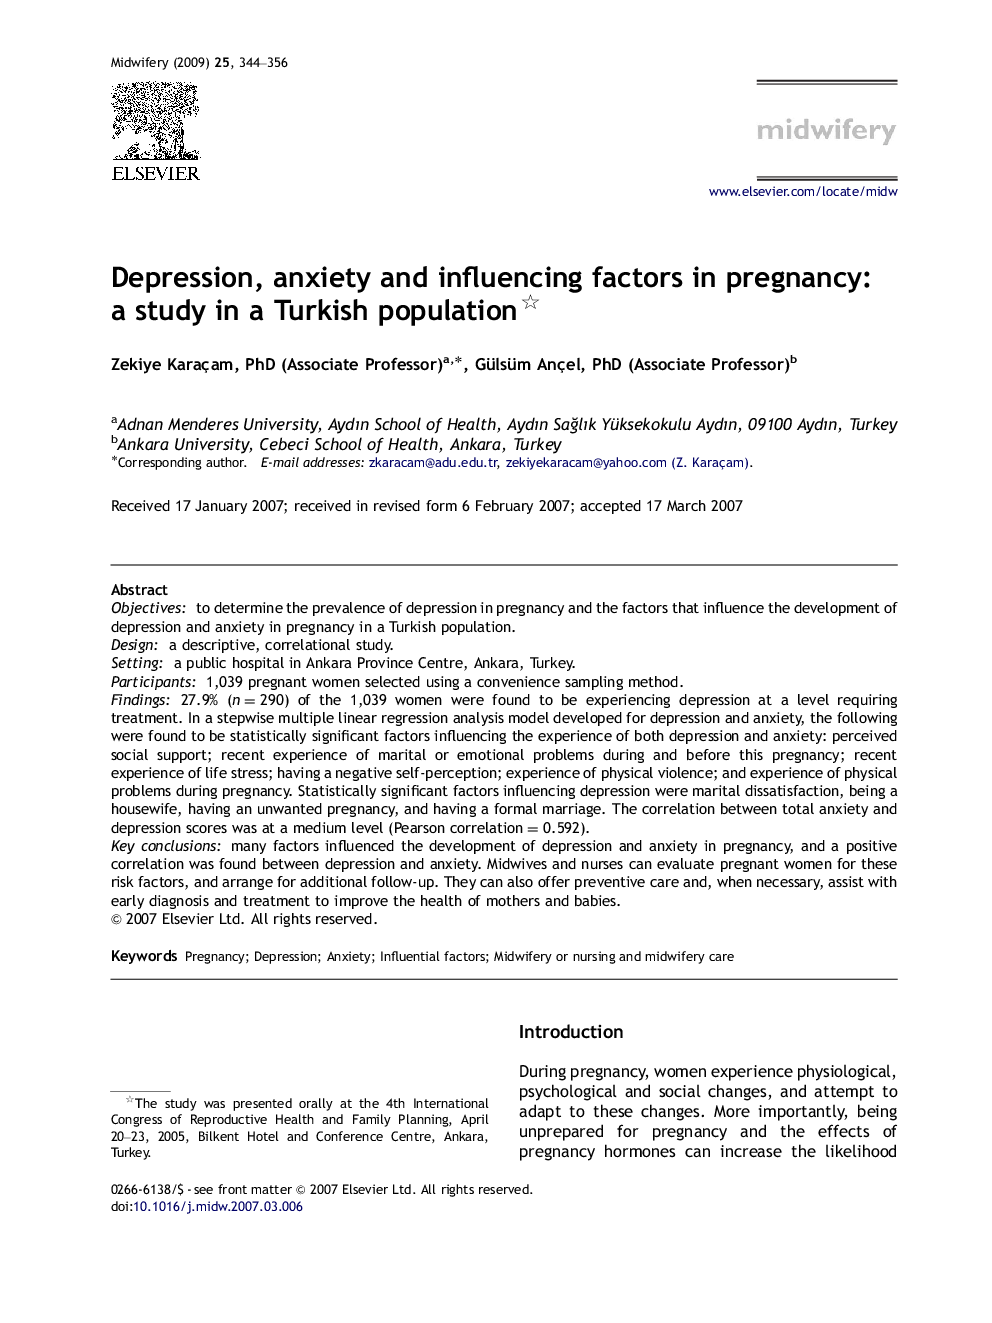 Depression, anxiety and influencing factors in pregnancy: a study in a Turkish population 